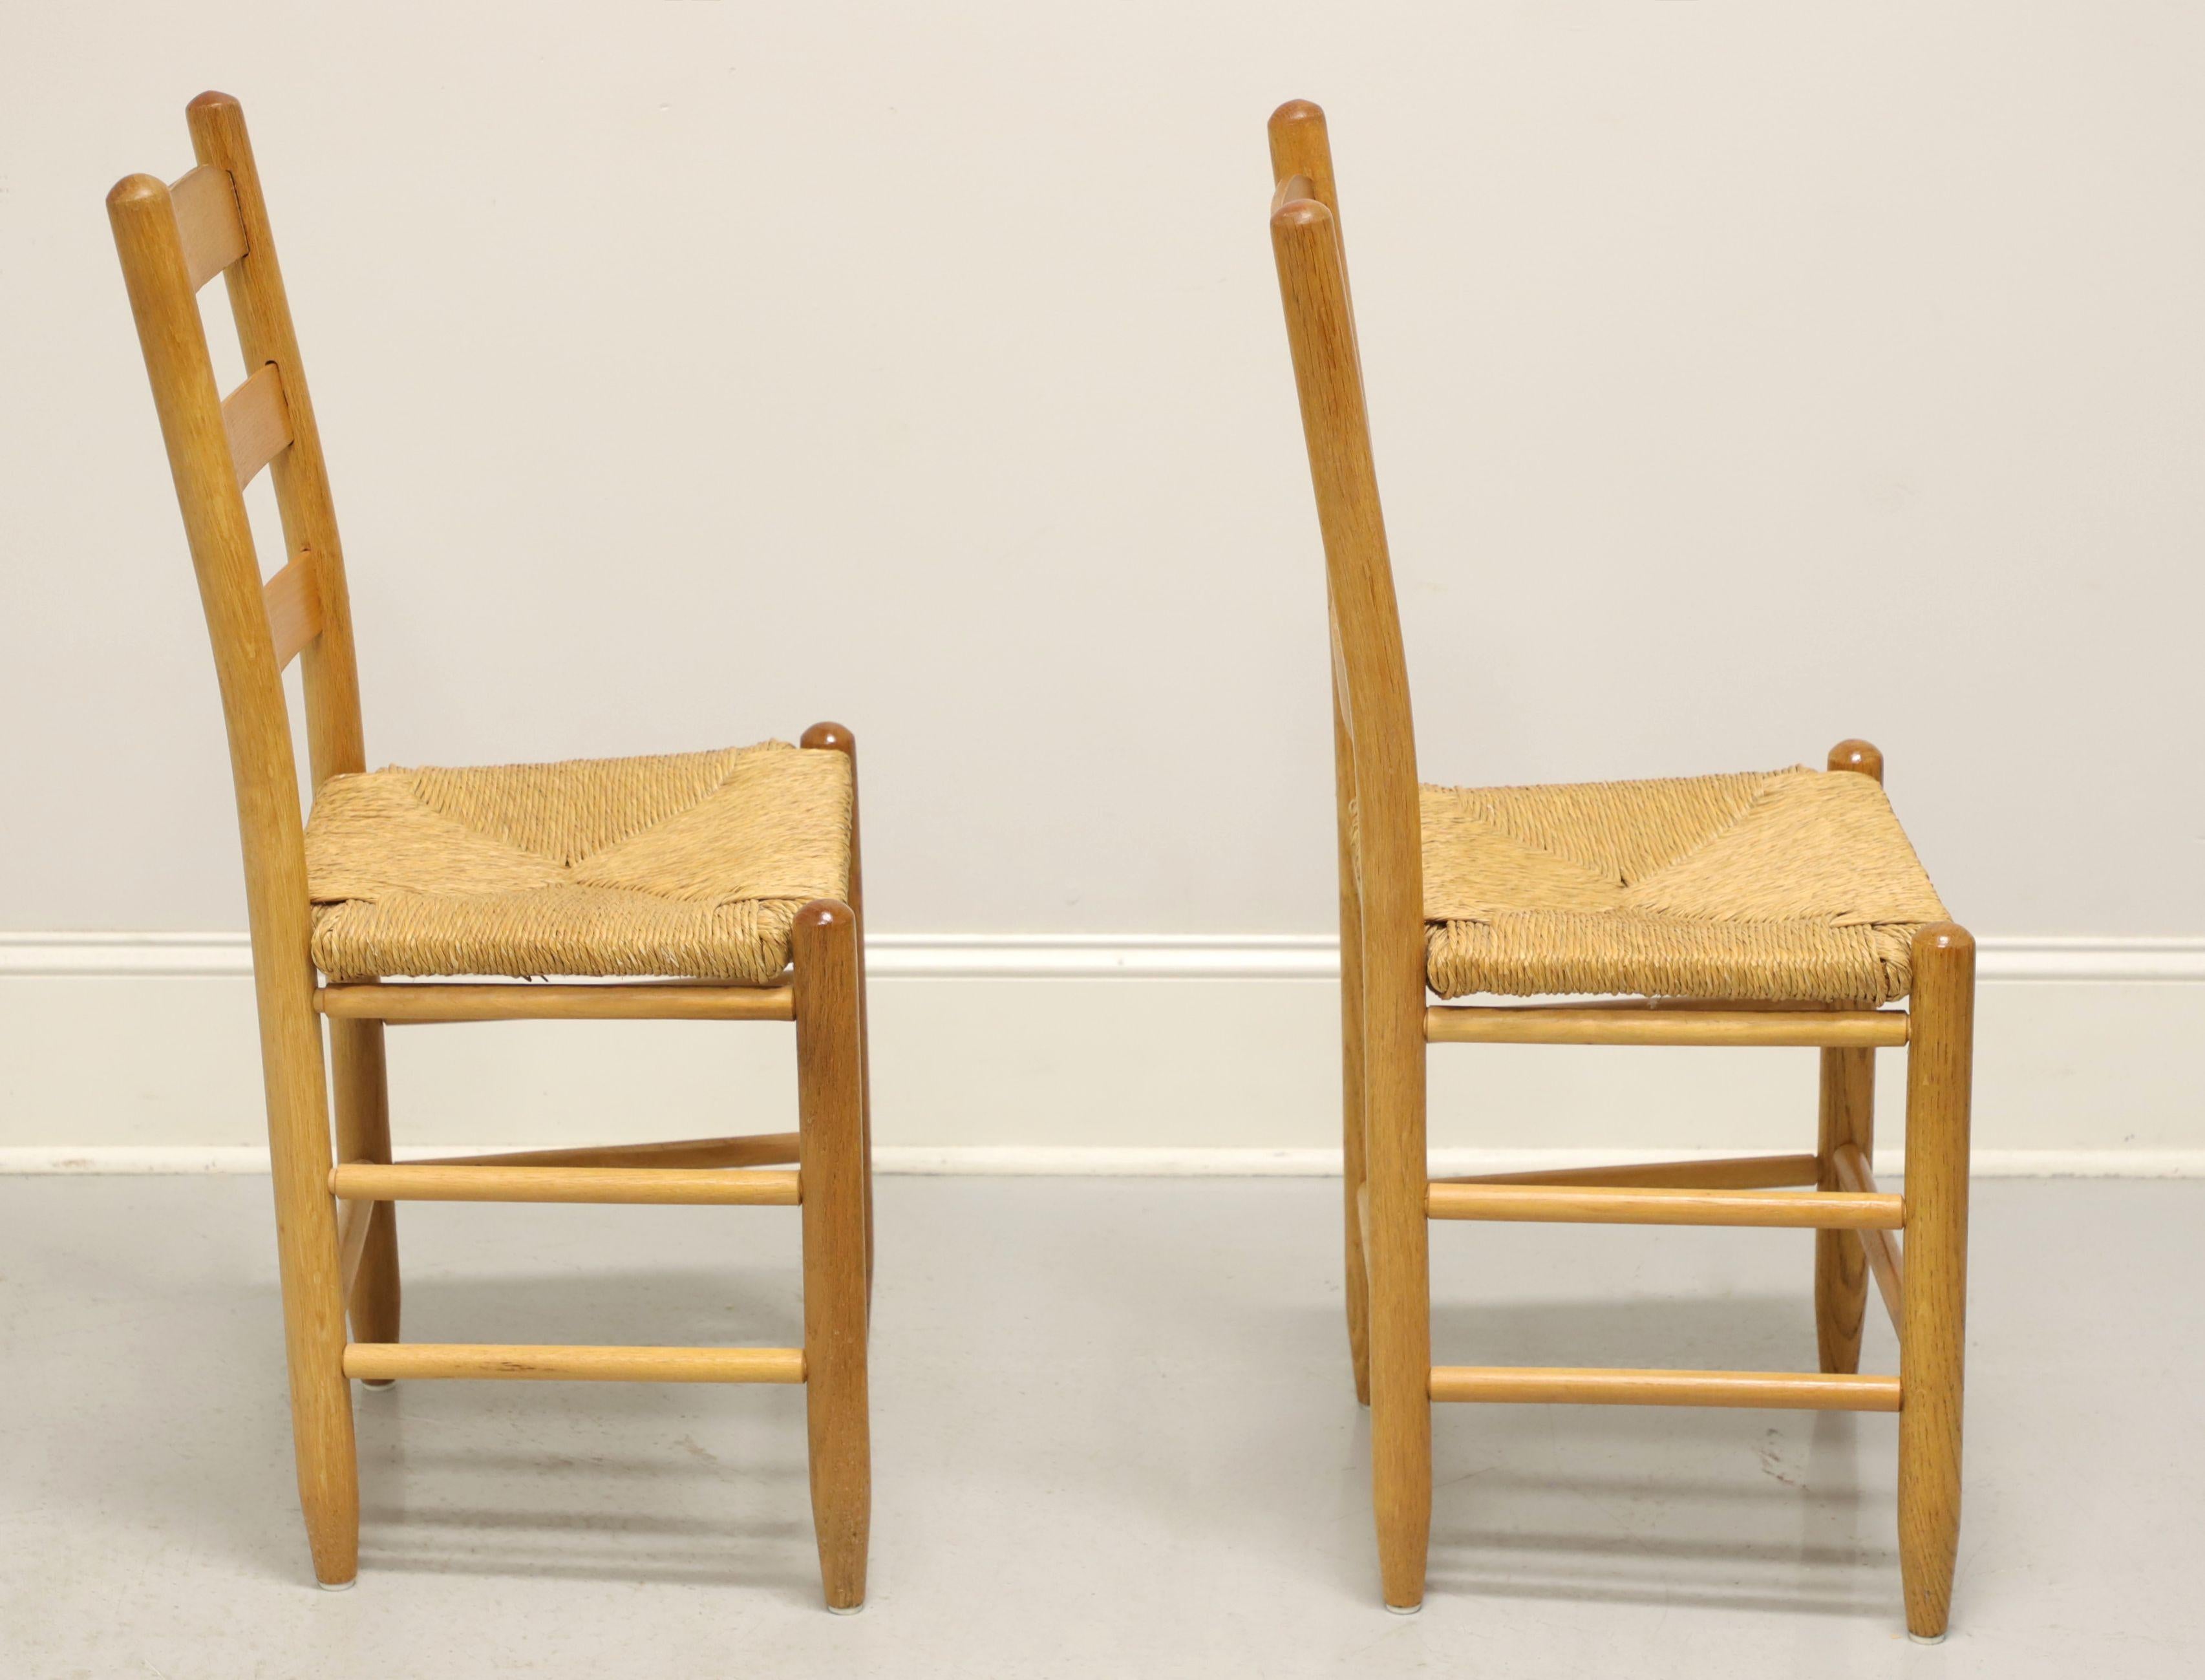 Rustic Mid 20th Century Oak Ladder Back Side Chairs with Rush Seats - Pair B For Sale